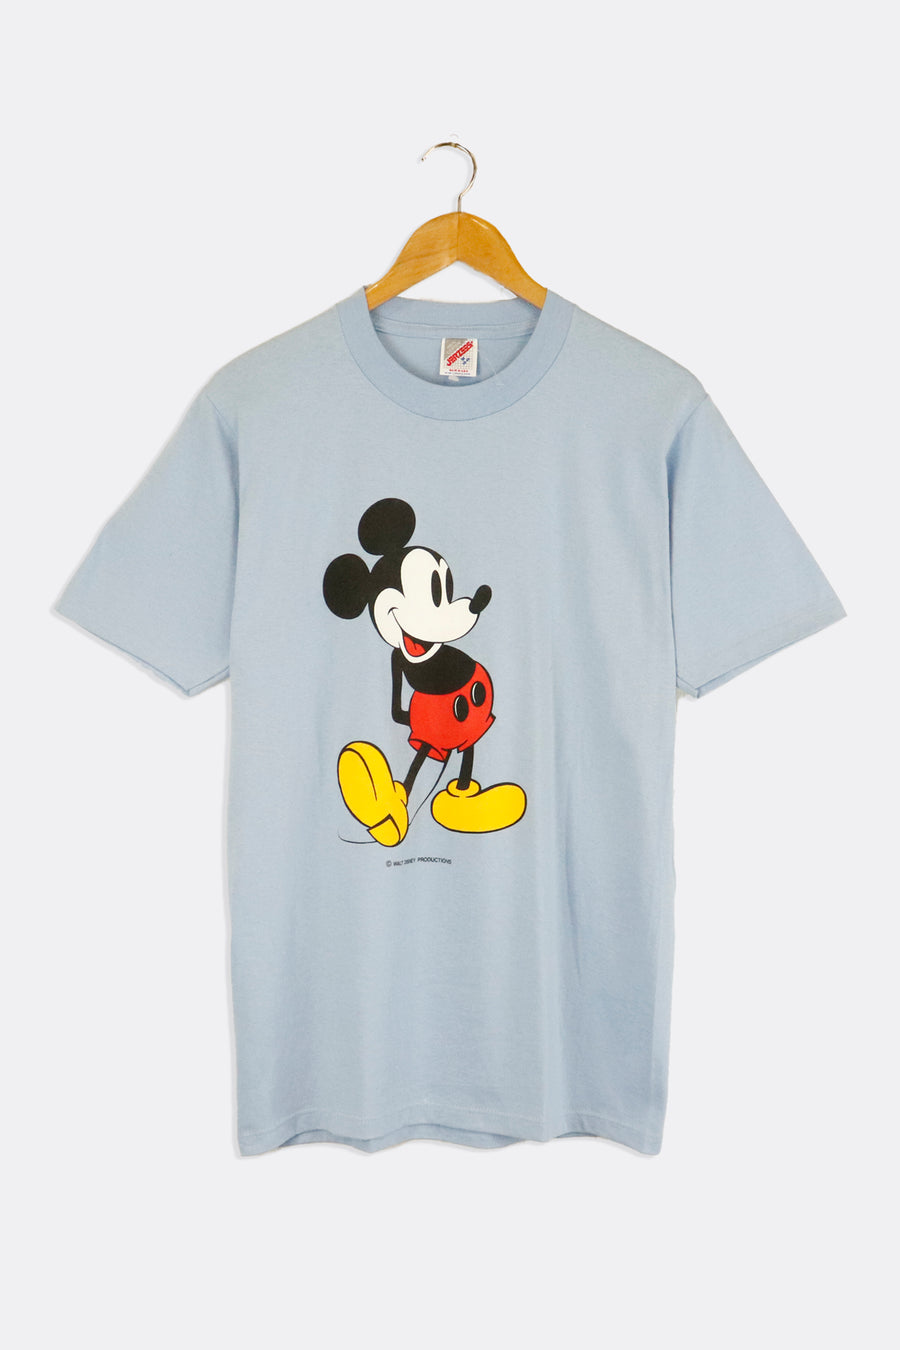 Vintage Disney Mickey Mouse Old Style Drawing Full Body Portrait Arms Begind Back Vinyl T Shirt Sz M